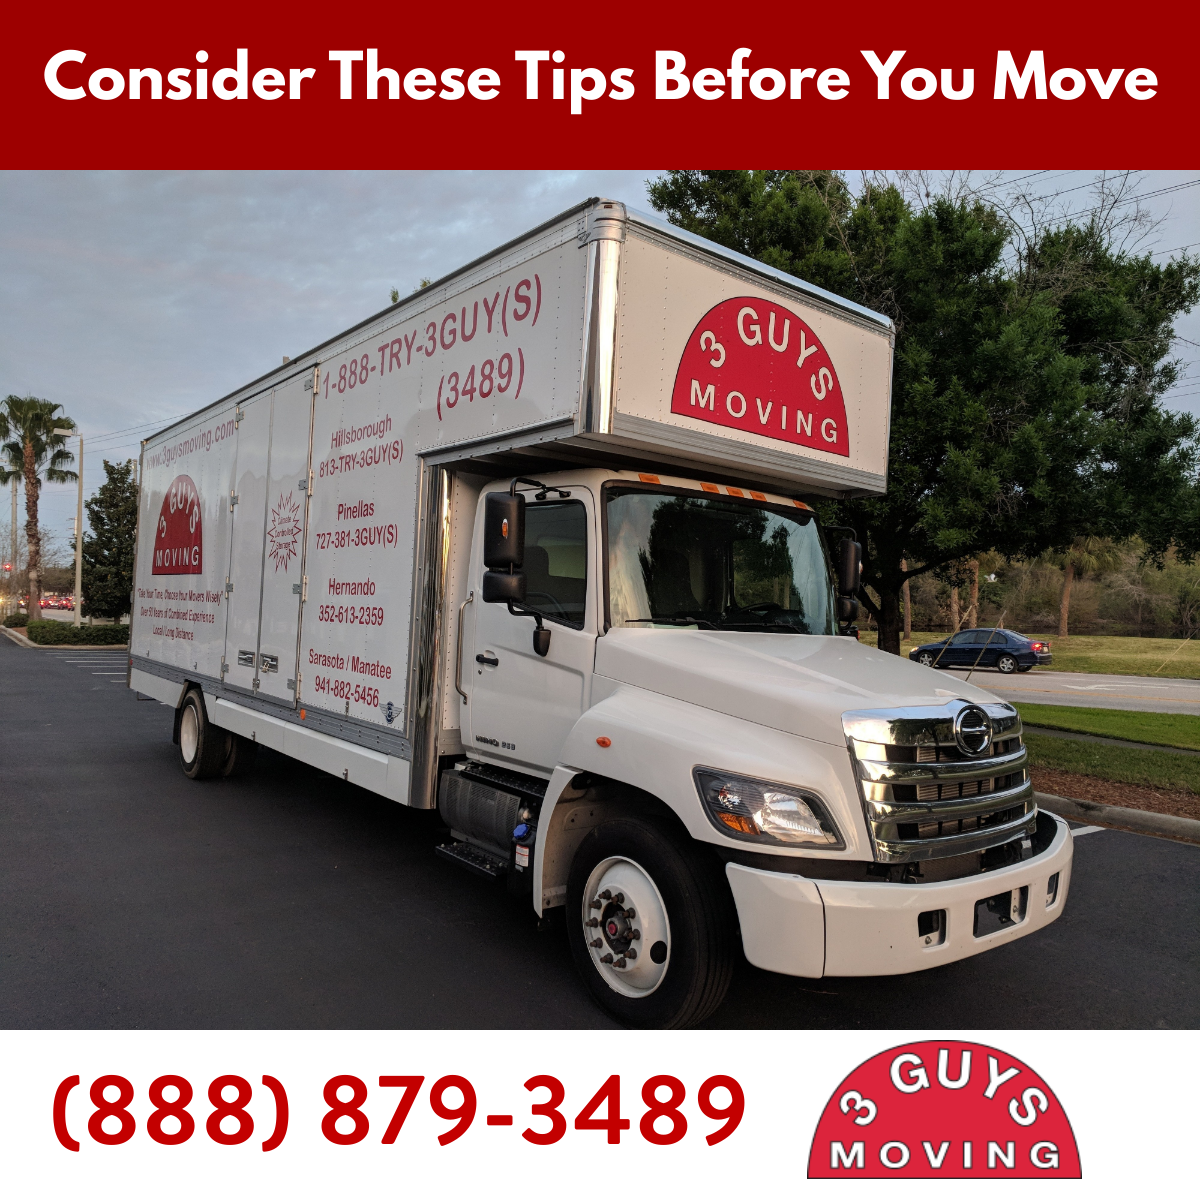 Consider These Tips Before You Move - Consider These Tips Before You Move